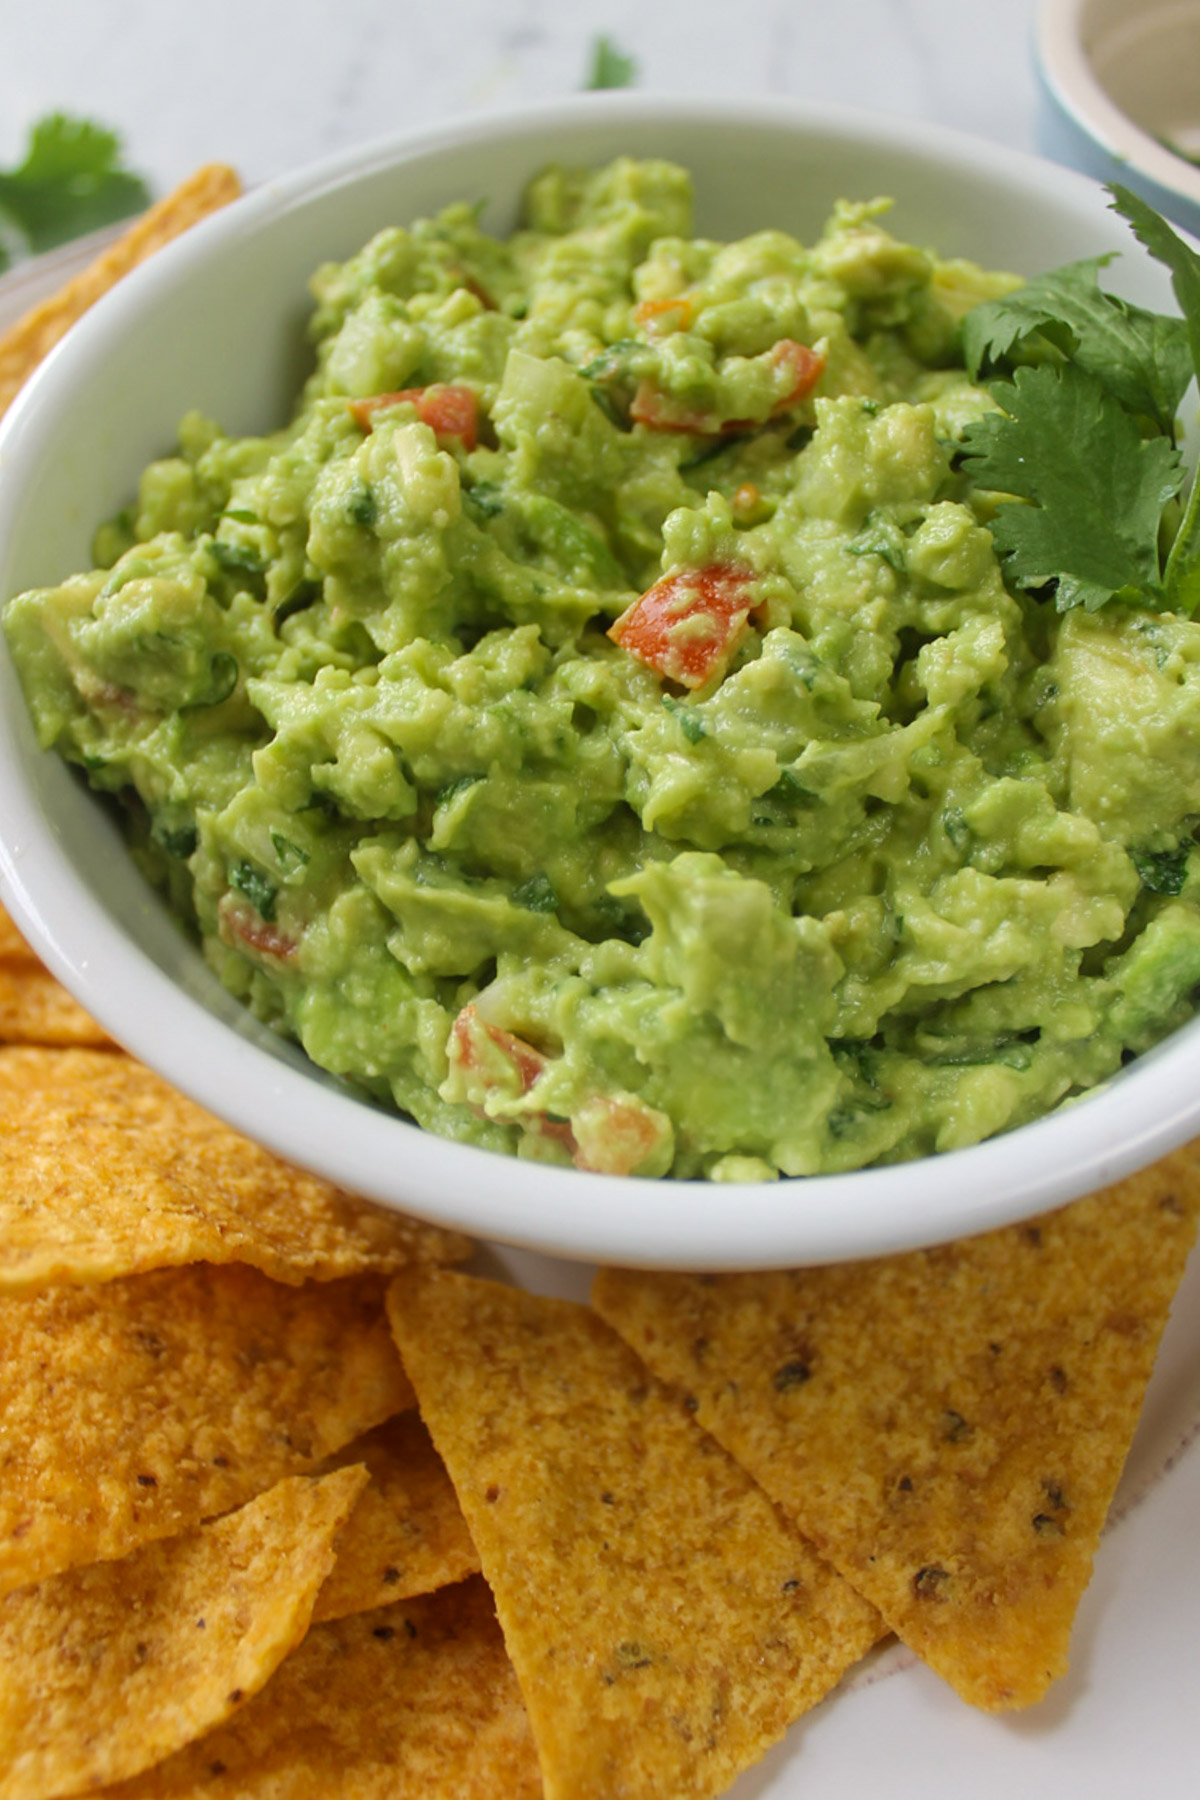 A bowl of Guacamole with tortilla chips.